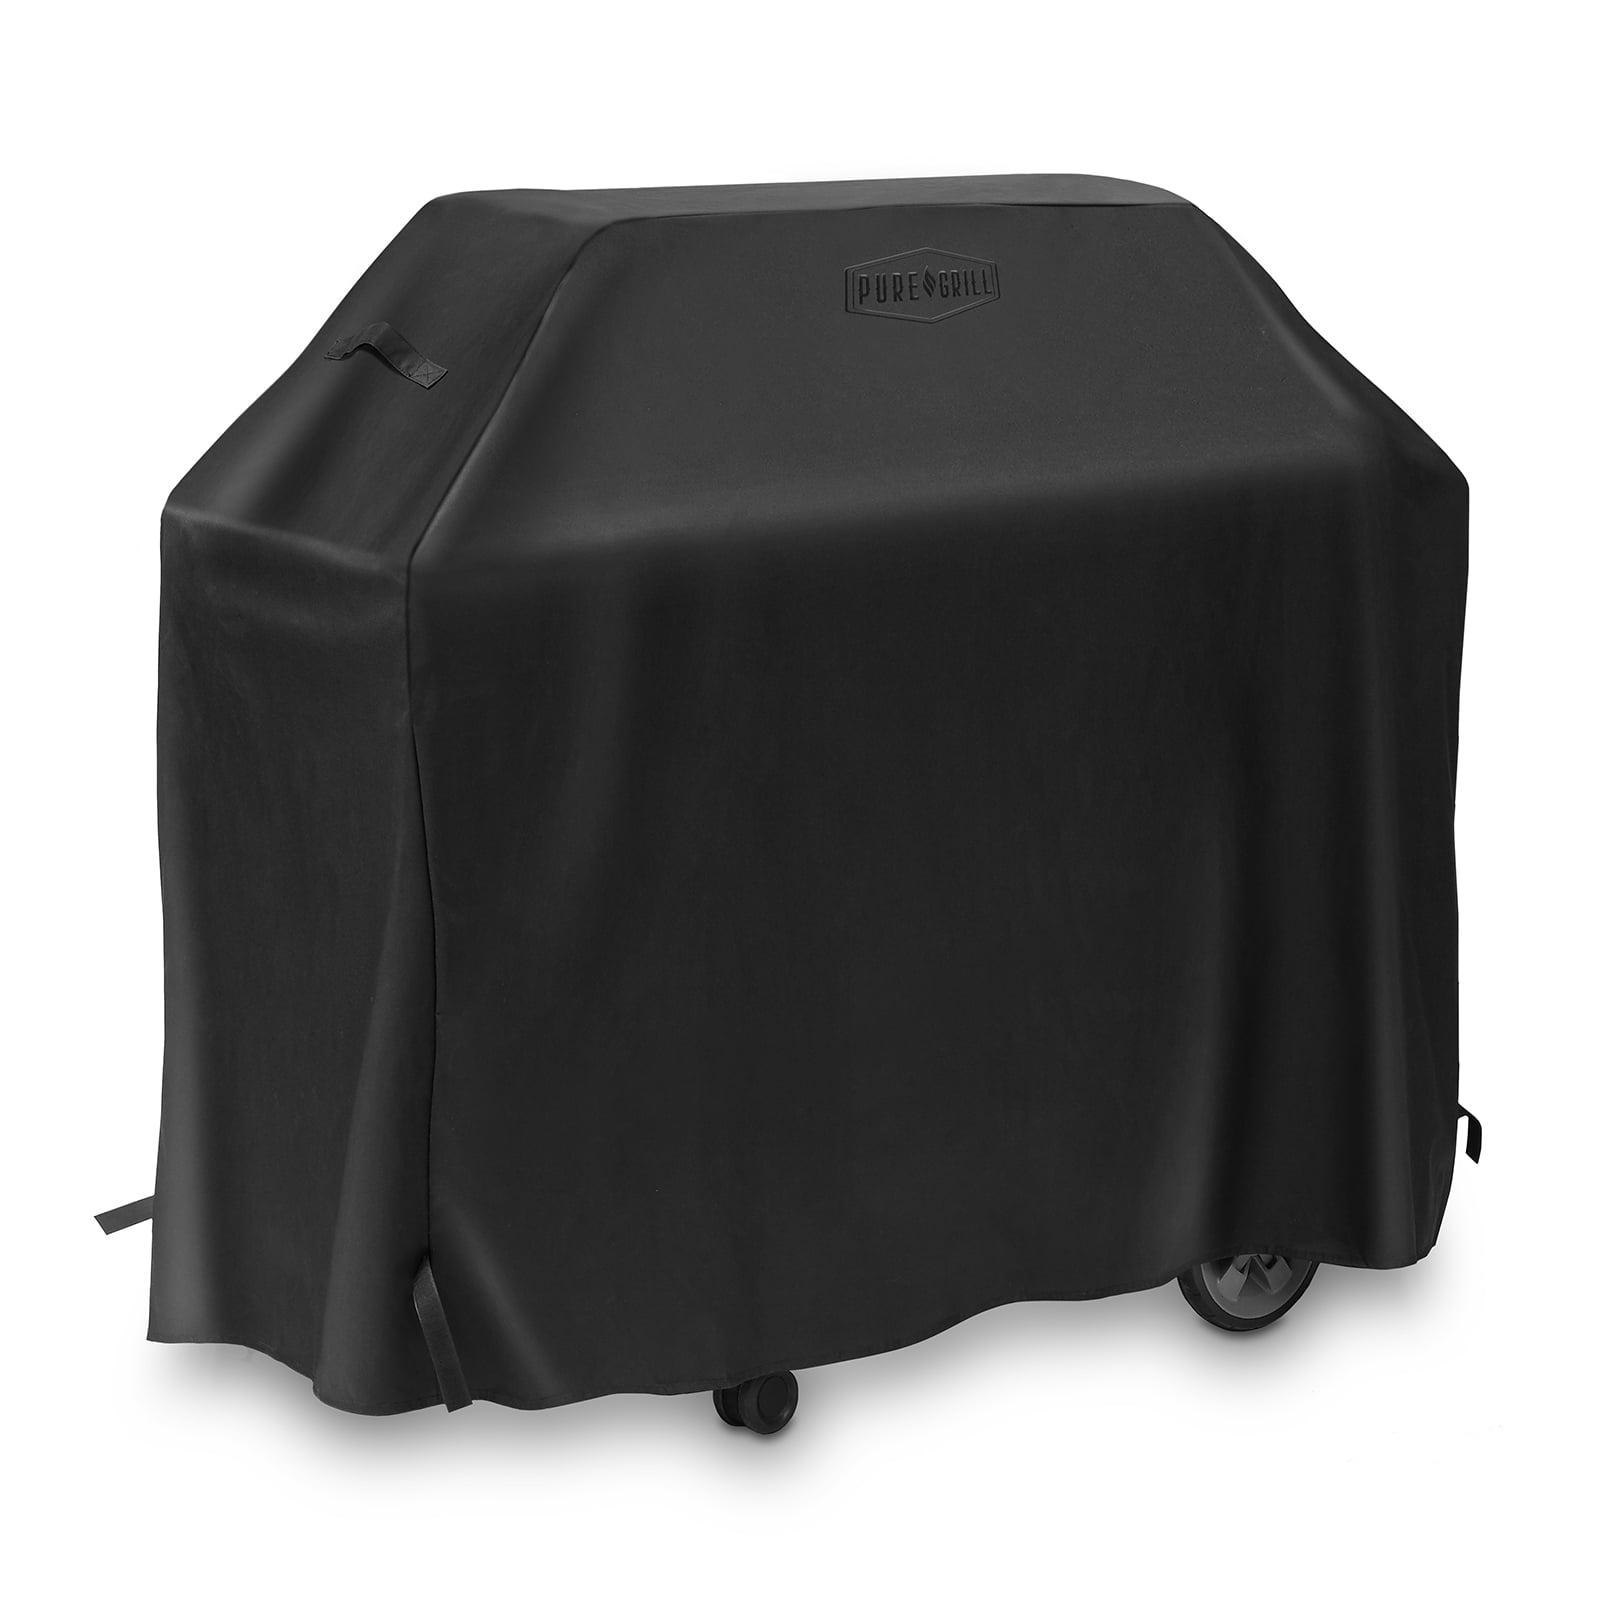 pit boss memphis ultimate bbq grill cover